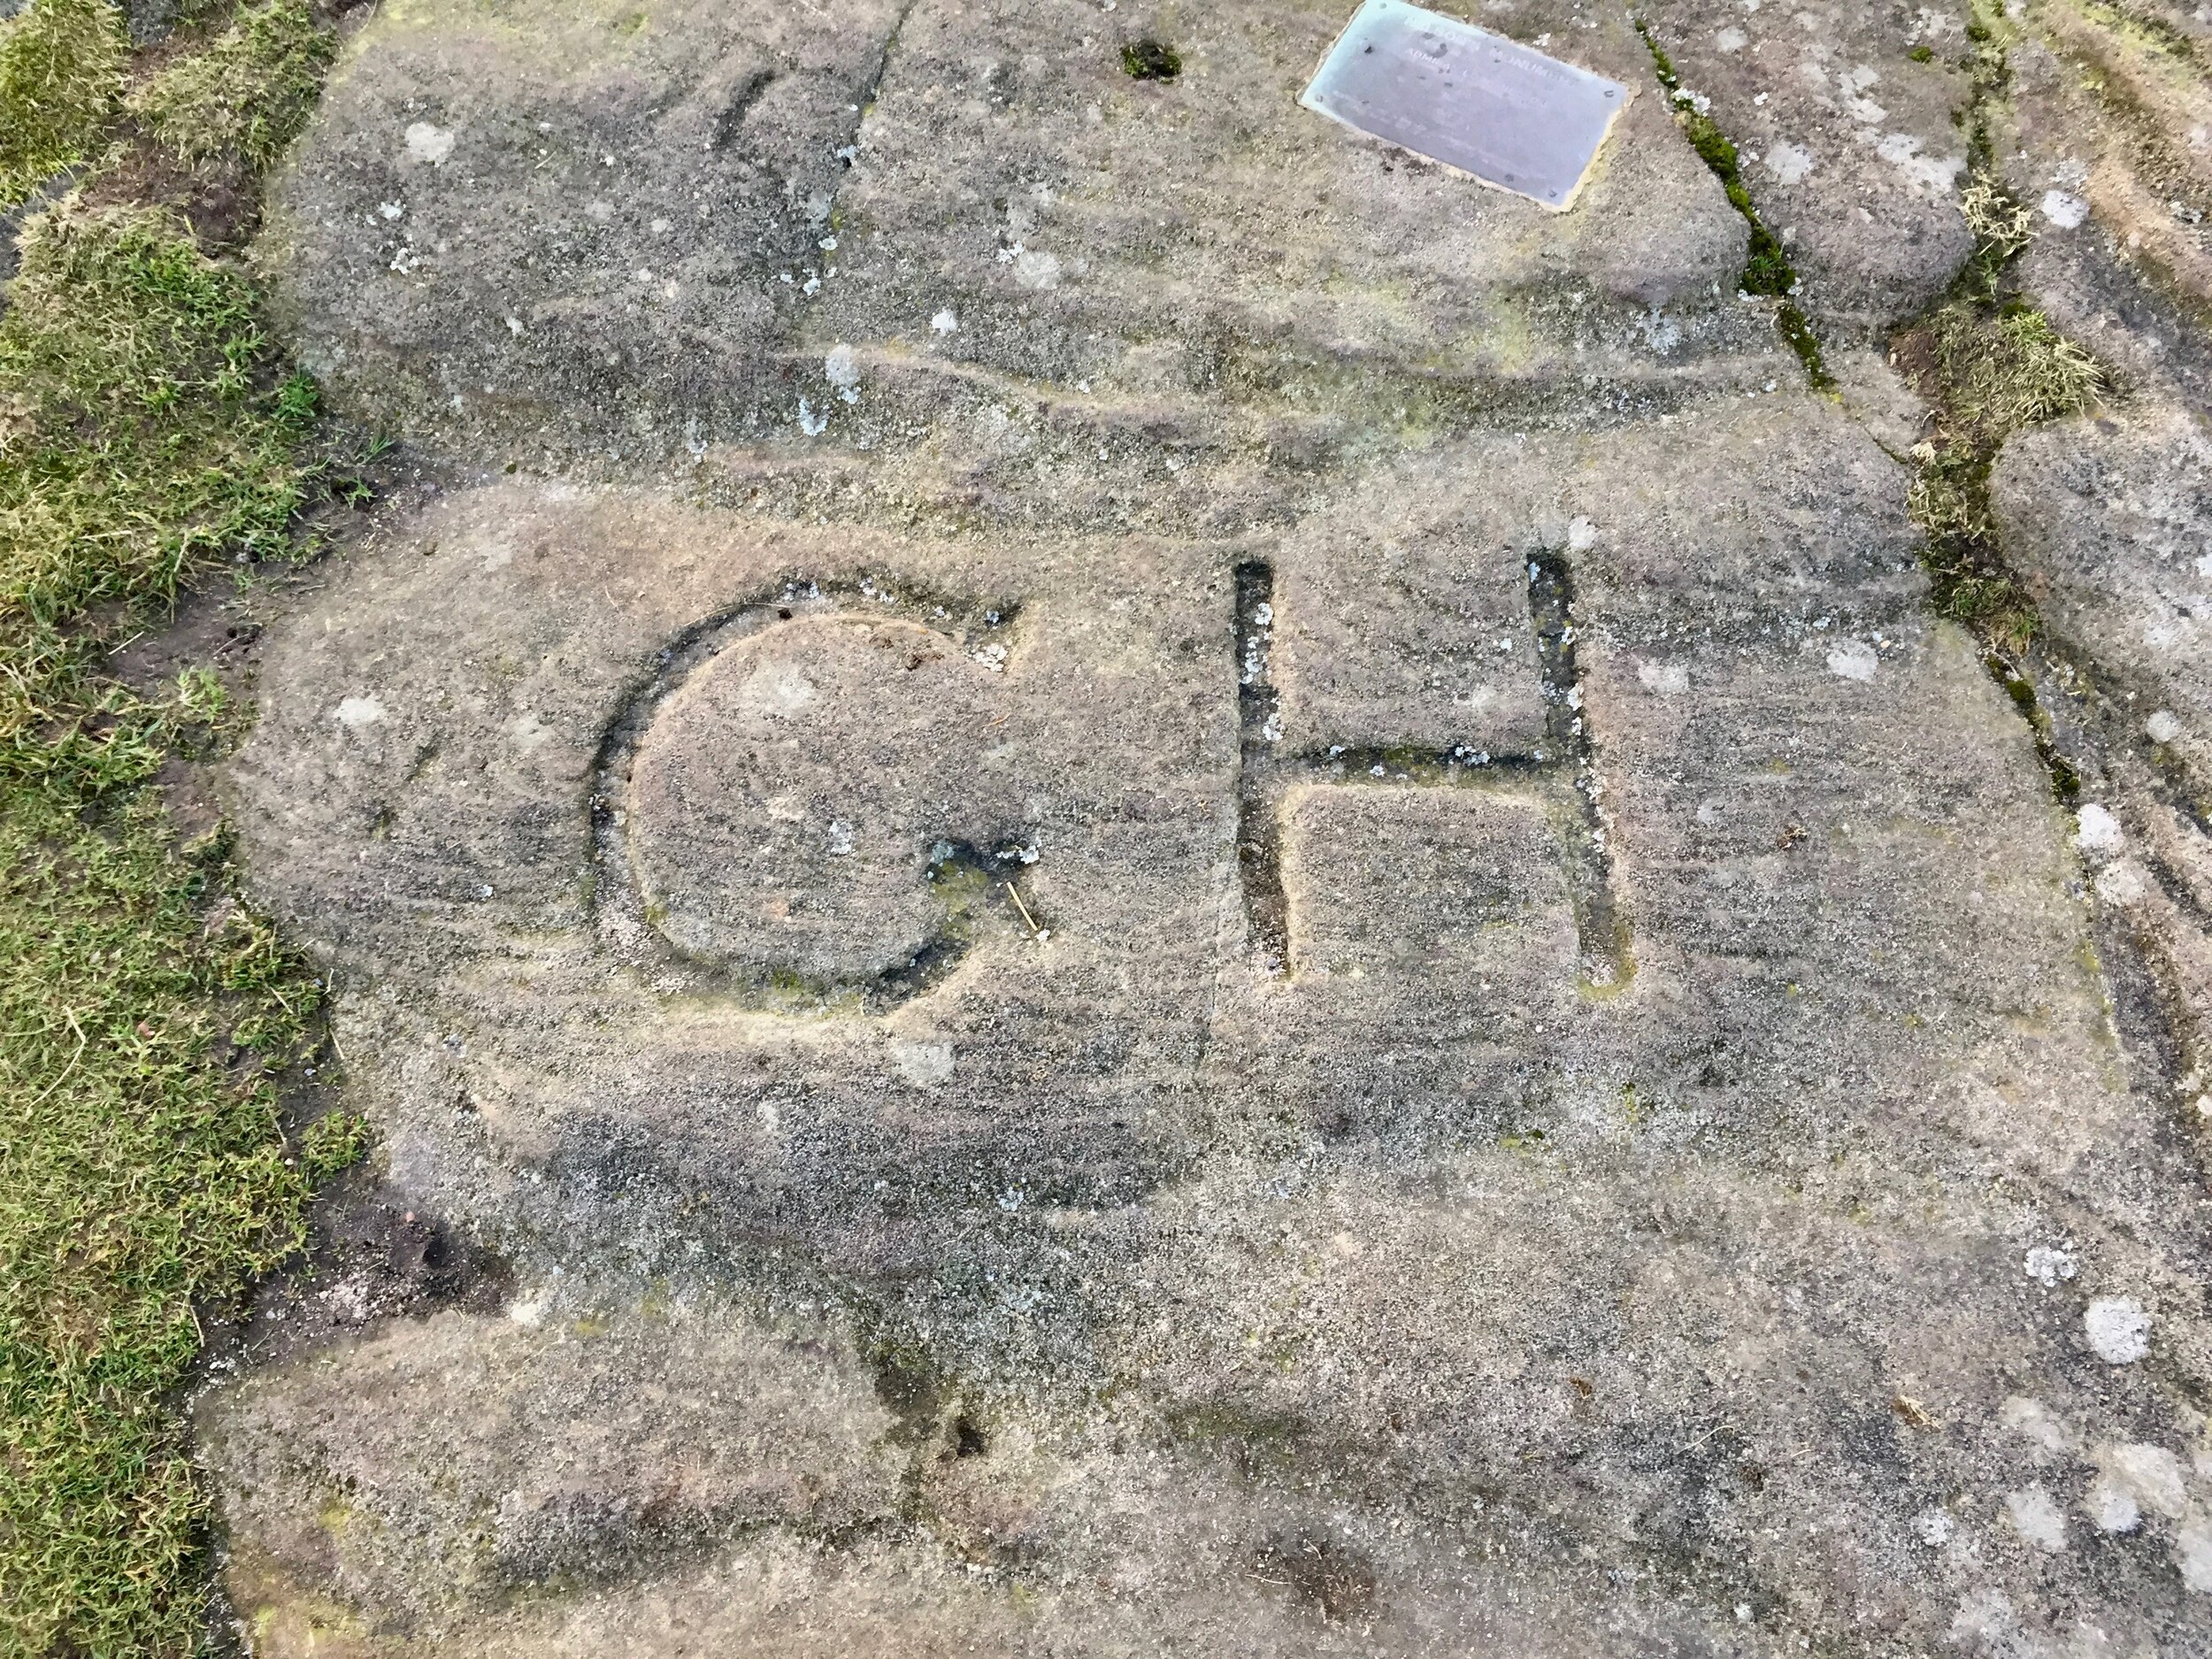  The inscription ‘GH’ in very large letters on the ground next to the plinth. No one knows what they mean or to whom they refer. 